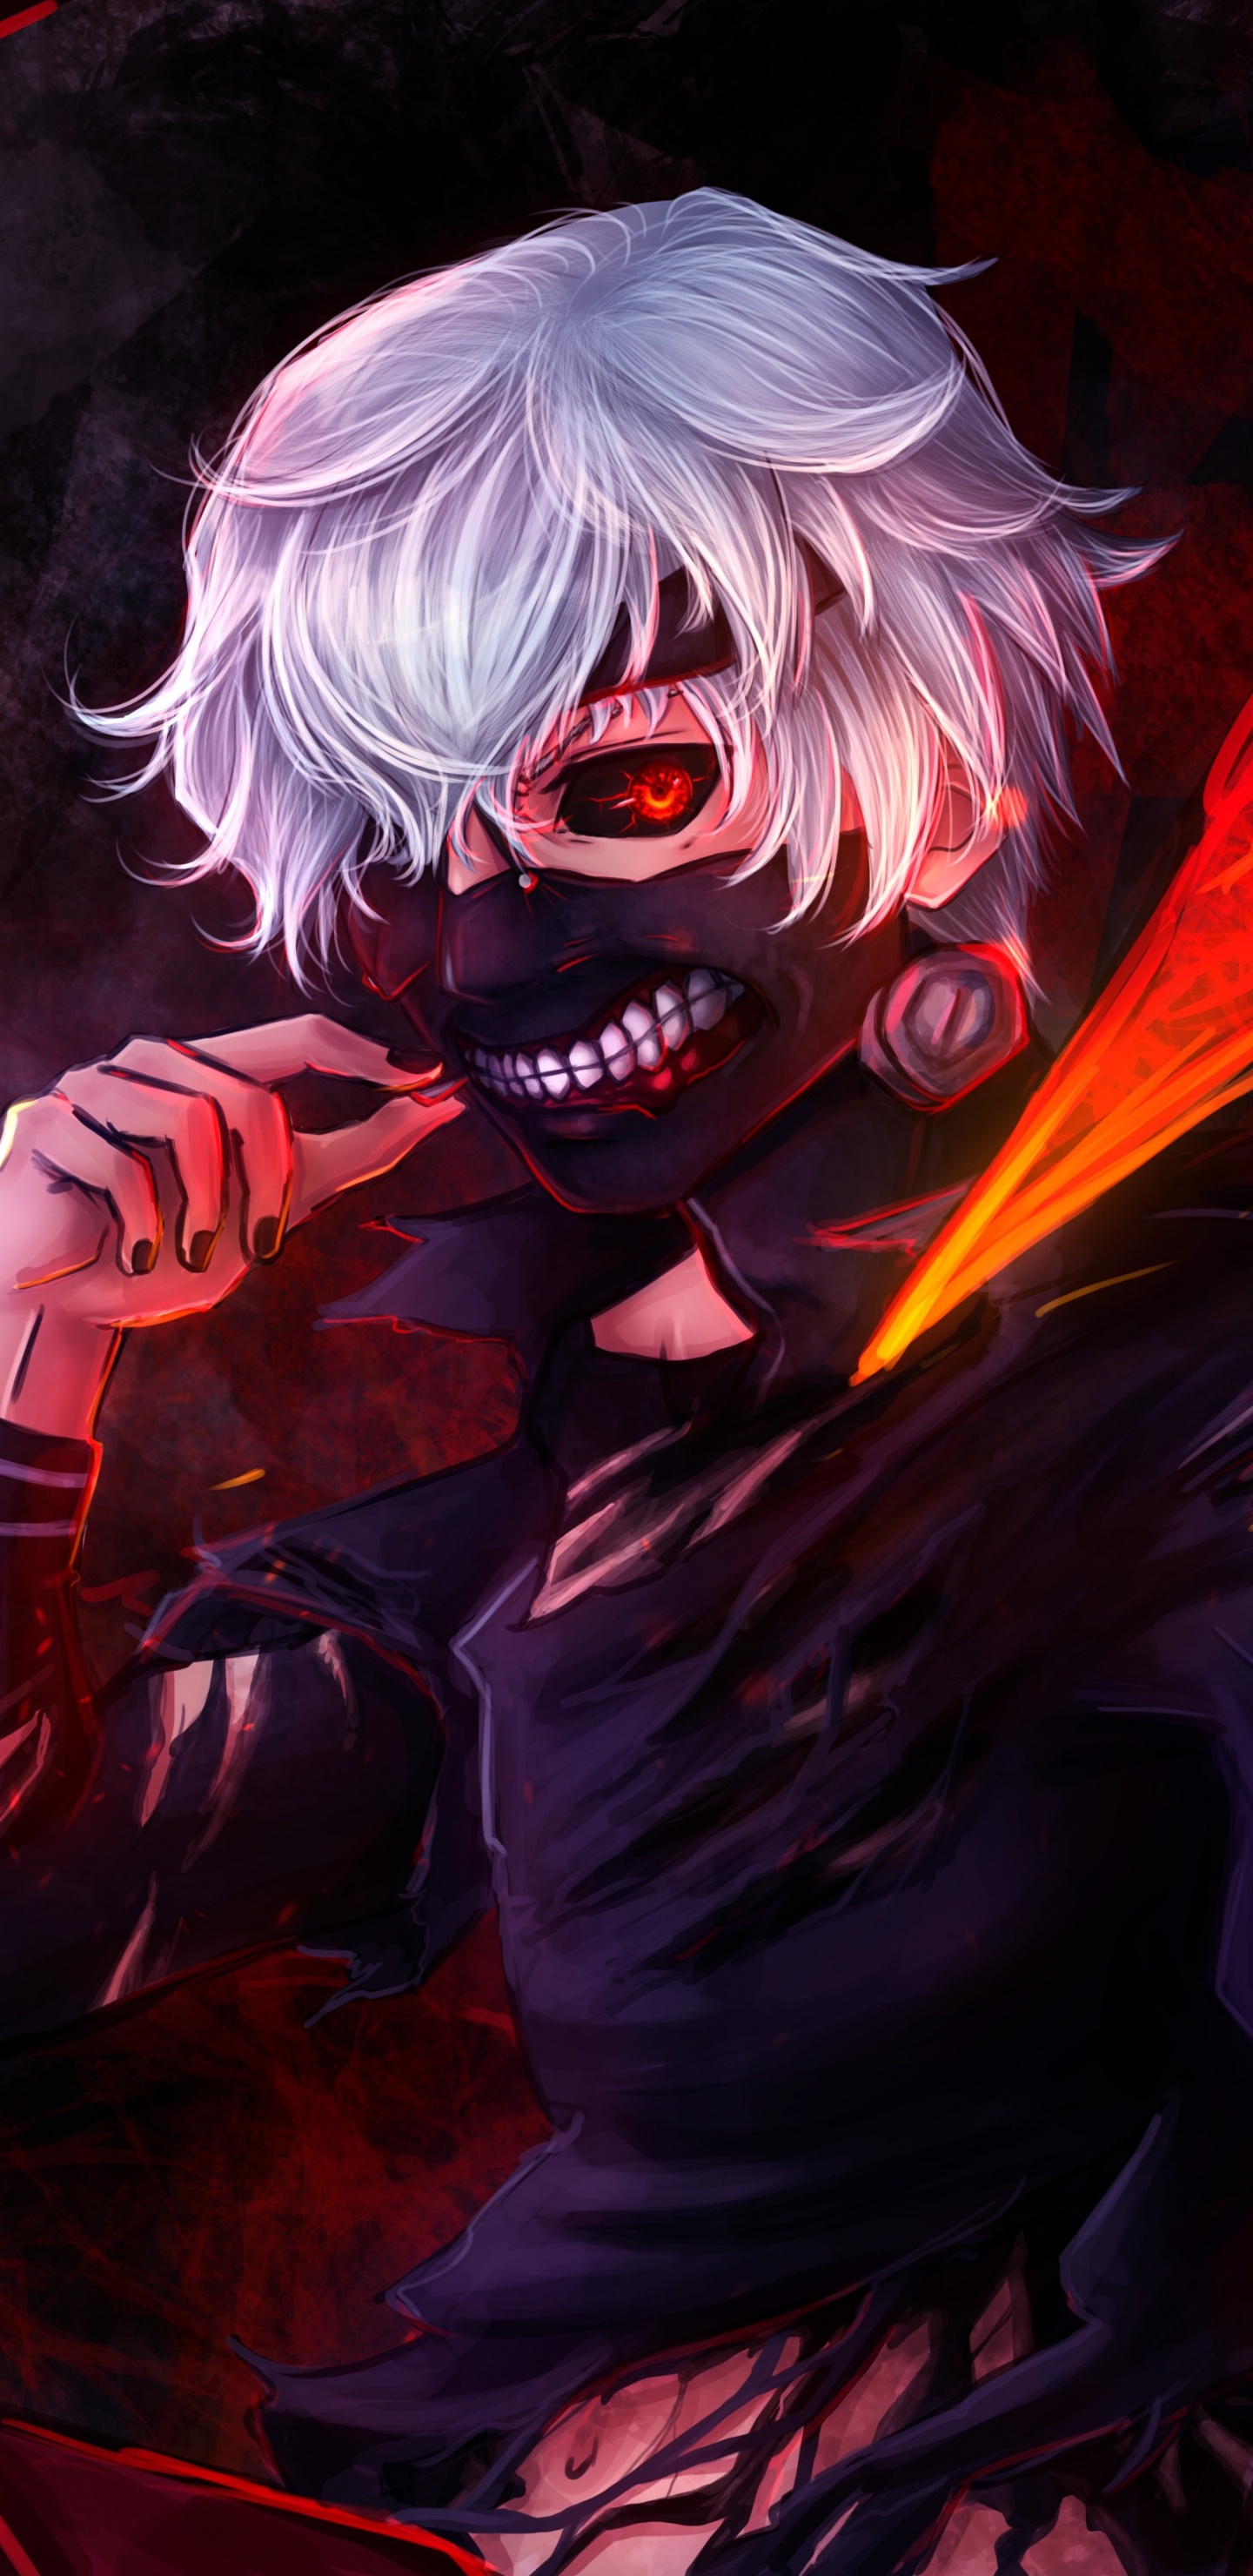 Man in Black and Red Suit Anime Character. Wallpaper in 1440x2960 Resolution